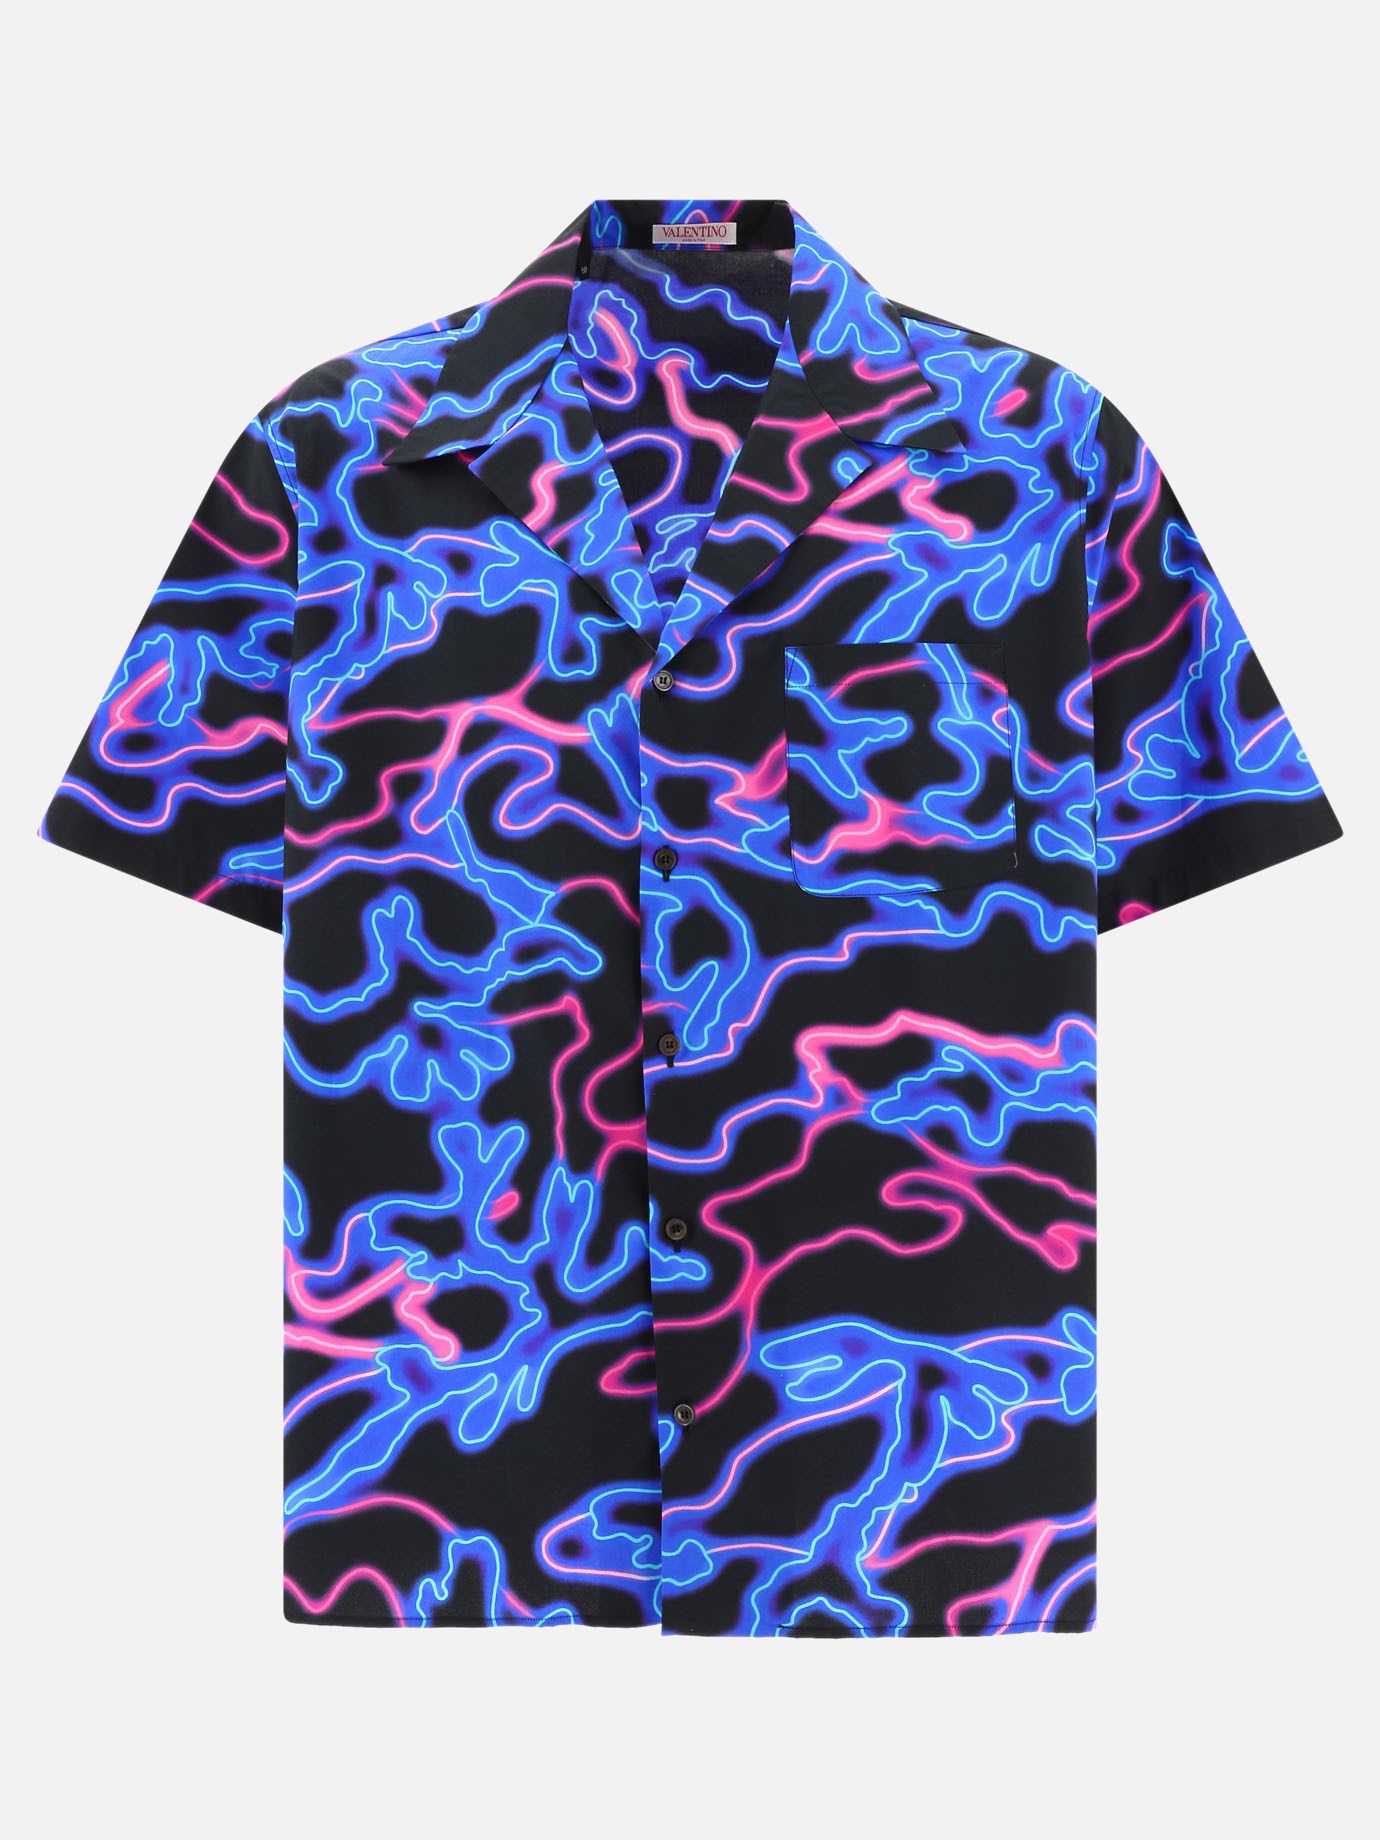  Neon Camou  shirt by Valentino